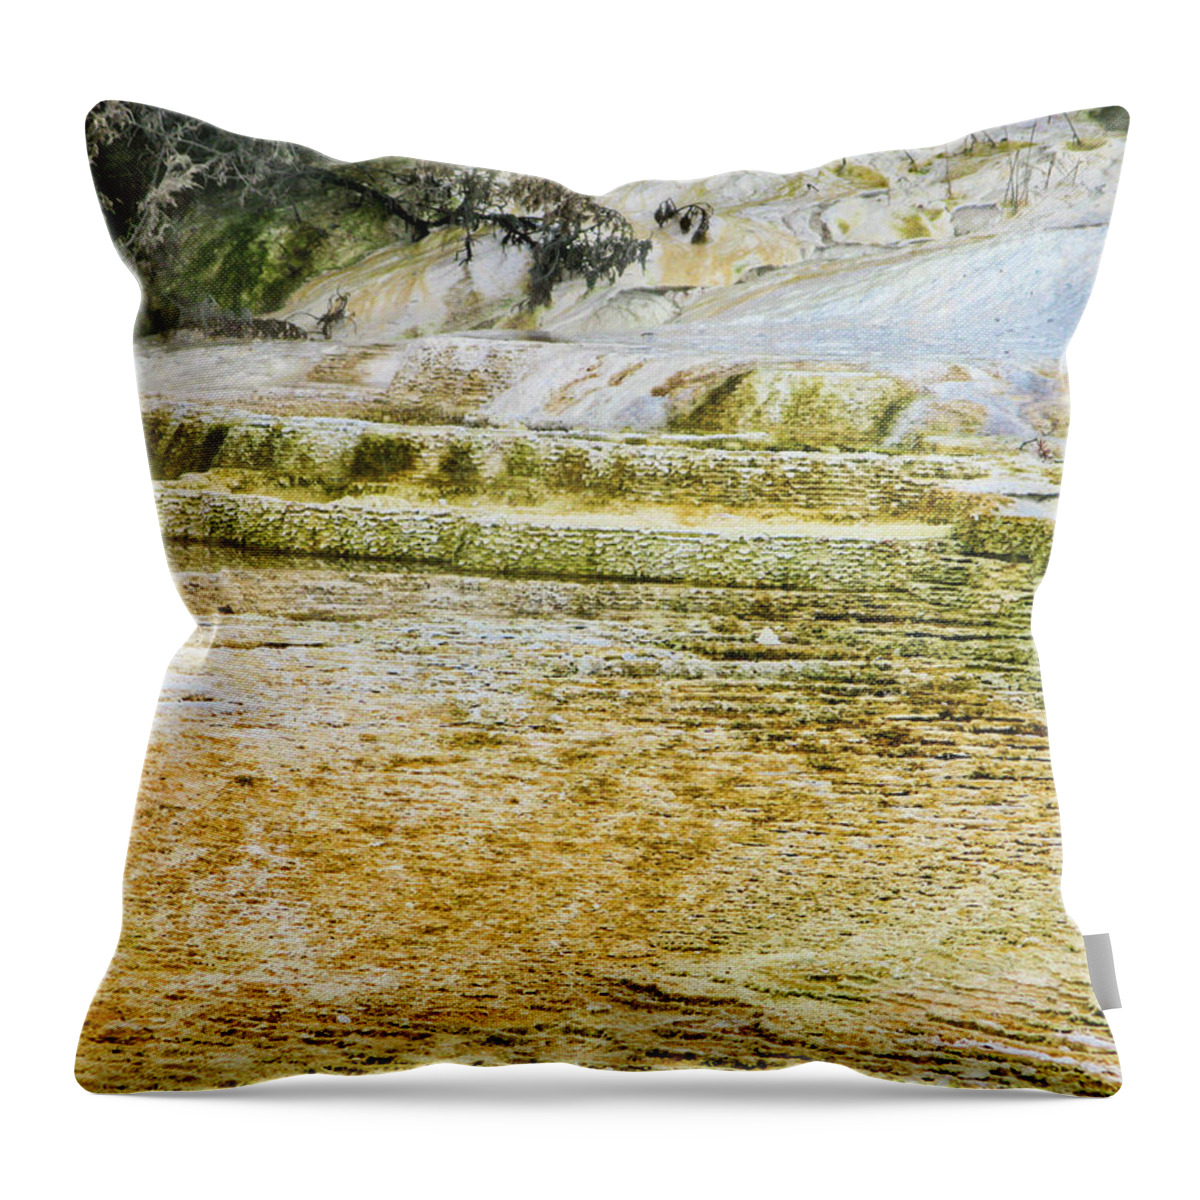 National Parks And Monuments Throw Pillow featuring the photograph Yellowstone 4 by Segura Shaw Photography